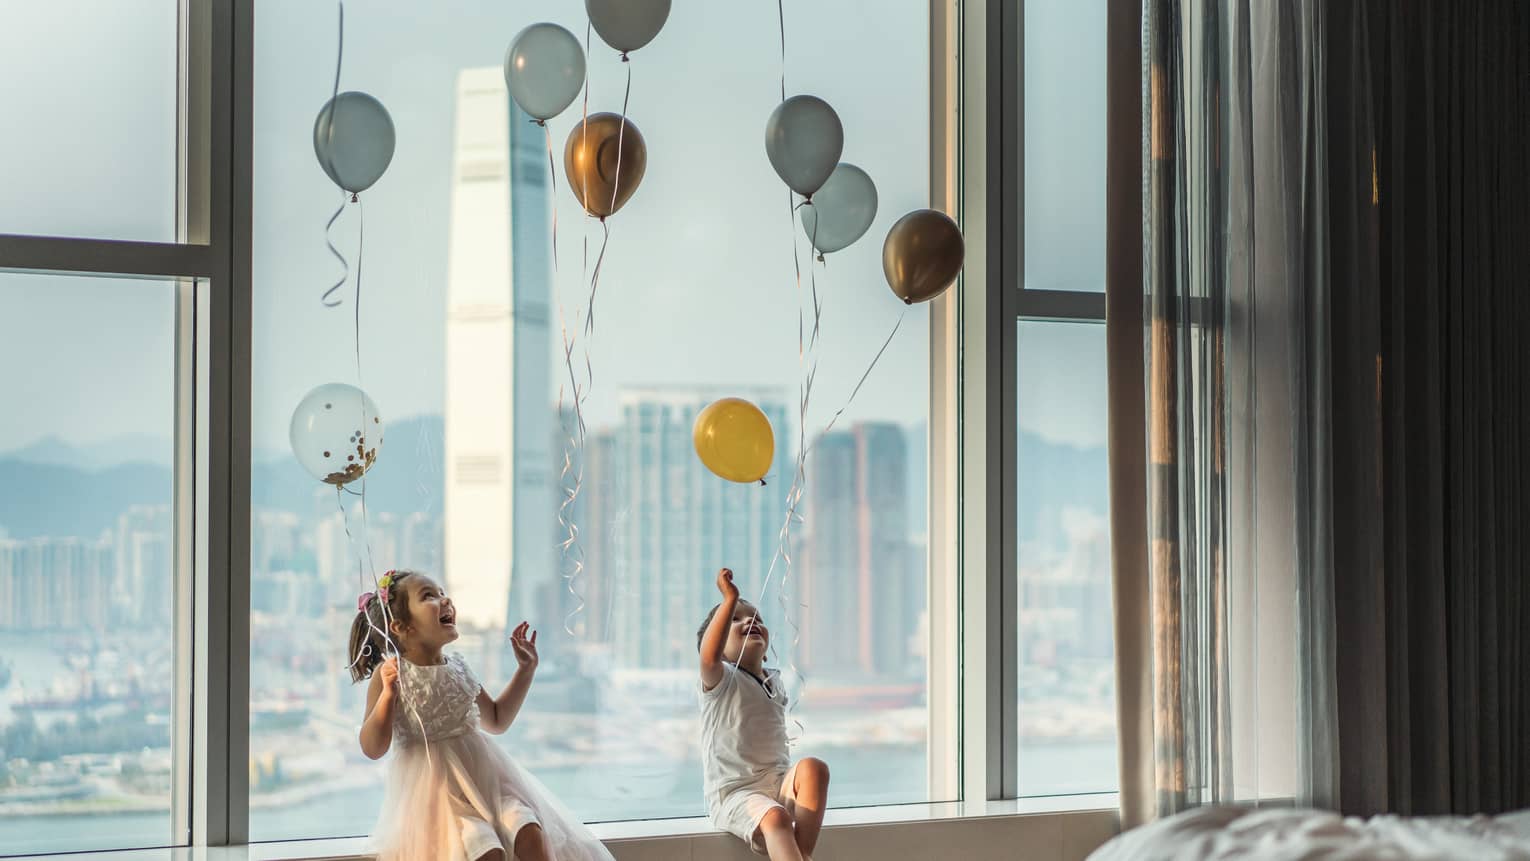 Two young children playing with balloons.